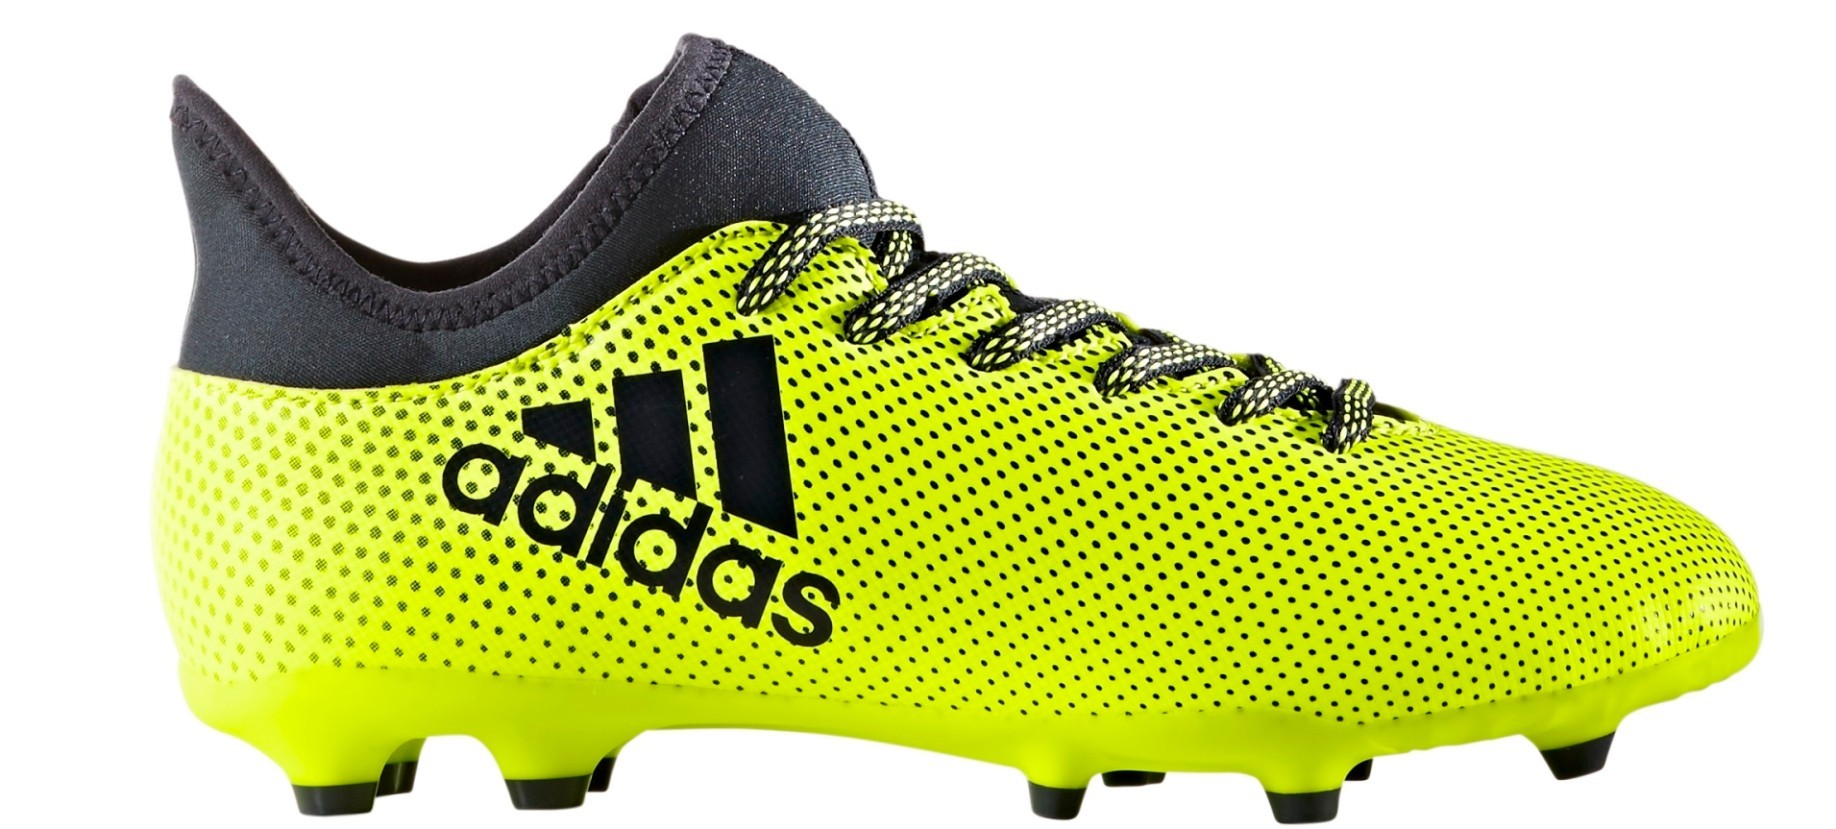 Football boots Child Adidas X 17.3 FG Ocean Storm Pack colore Yellow -  Adidas - SportIT.com